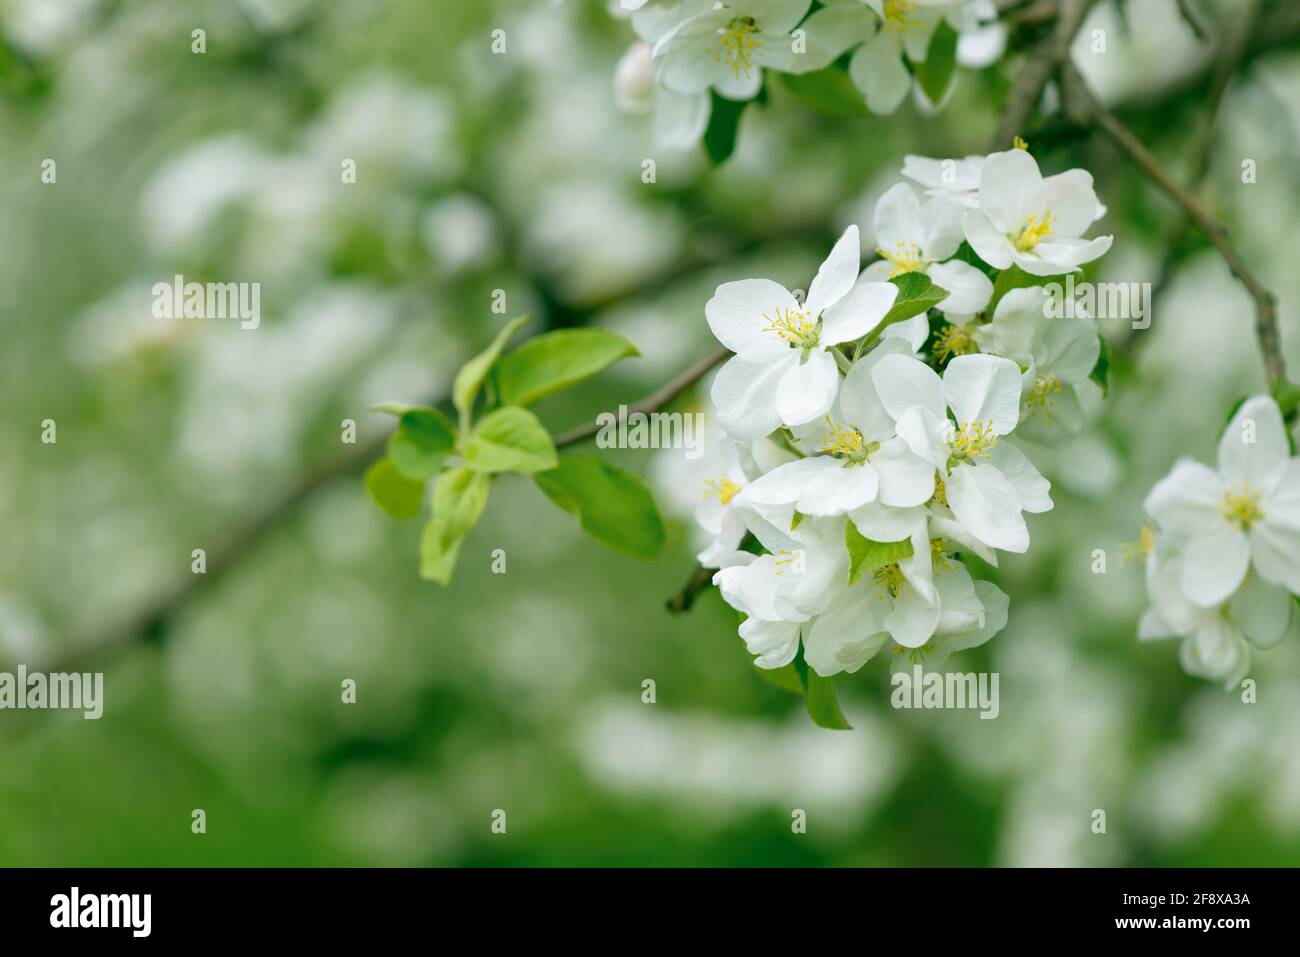 https://c8.alamy.com/comp/2F8XA3A/beautiful-flowering-cherry-plum-pear-or-apple-trees-background-with-blooming-flowers-in-spring-day-a-fragrant-spring-garden-2F8XA3A.jpg